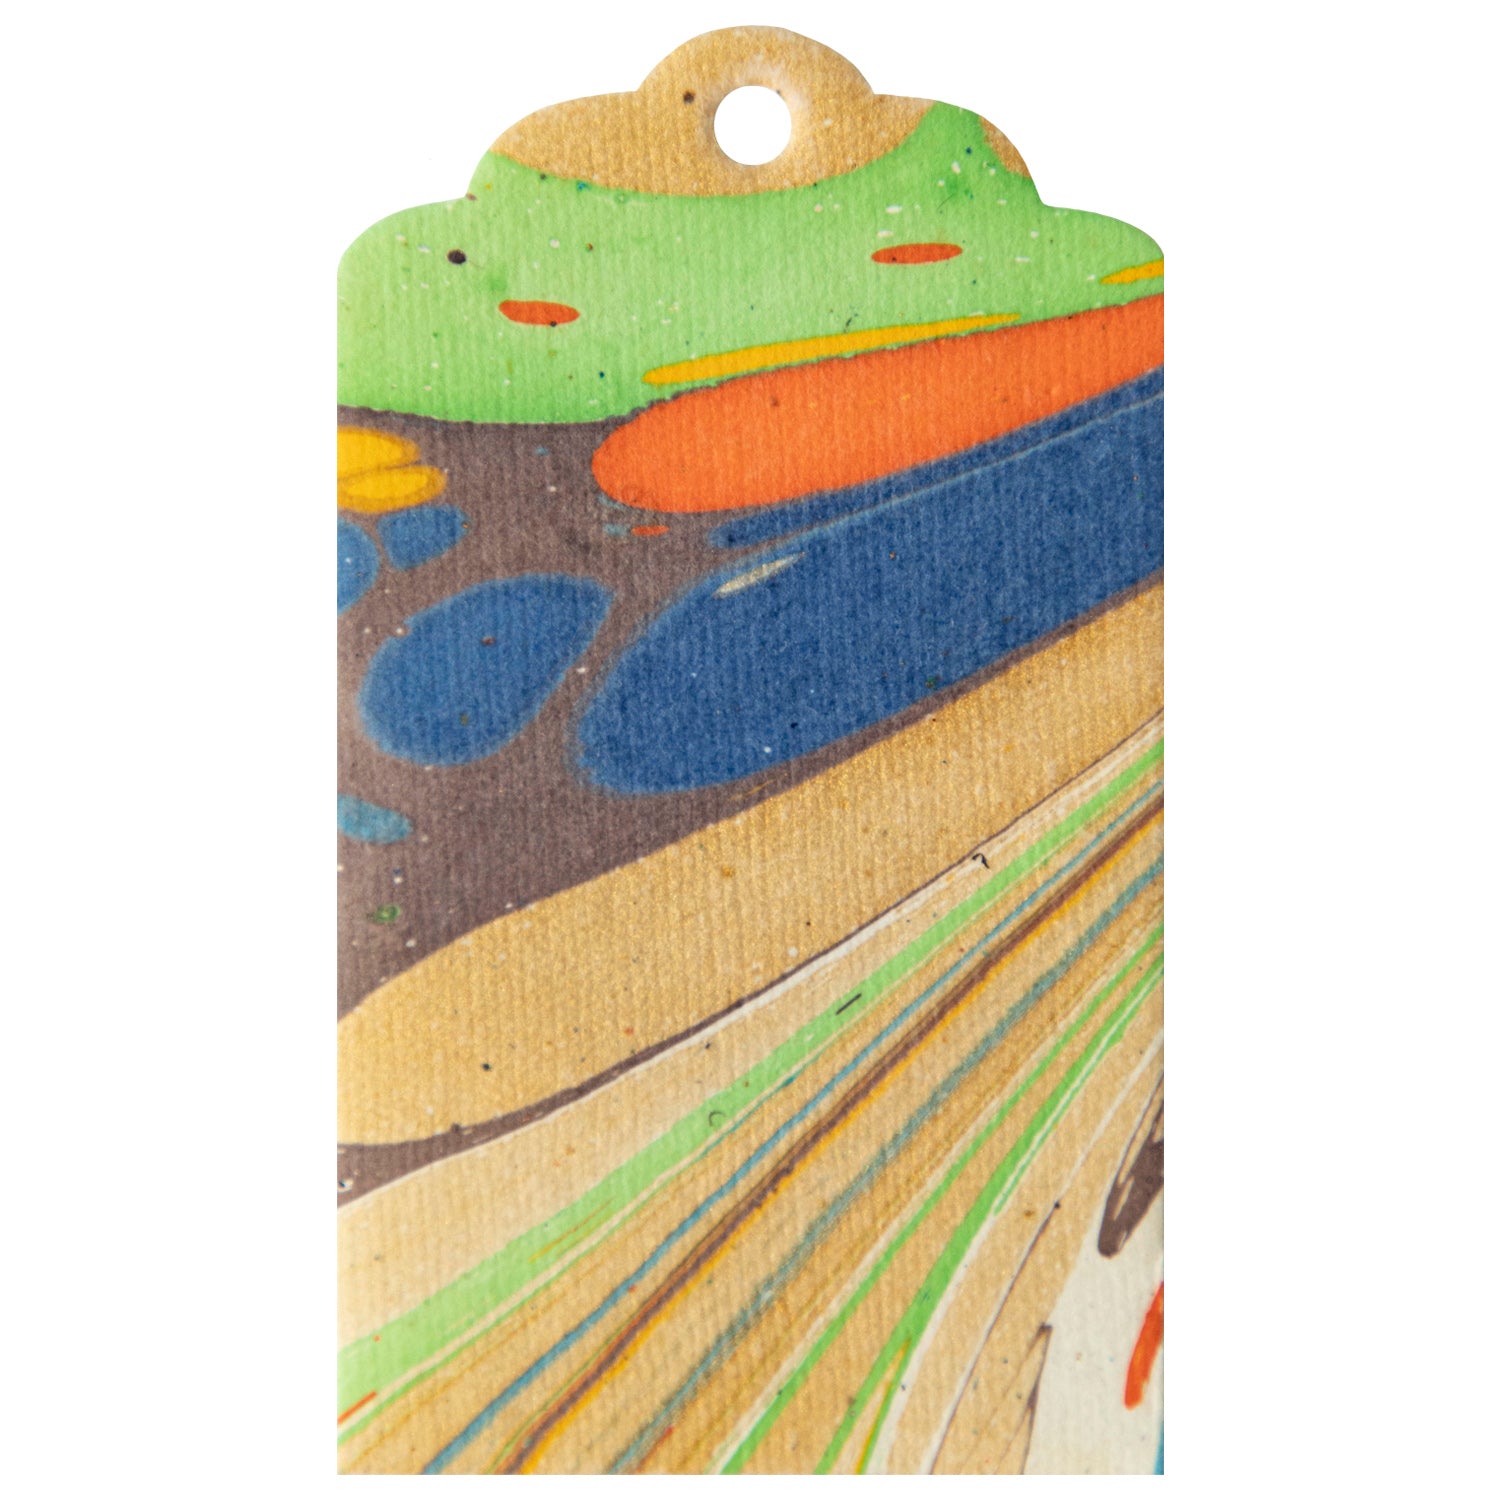 A bag with a unique and colorful design on it, featuring Multi Color Marbled Gift Tags by Hester &amp; Cook.